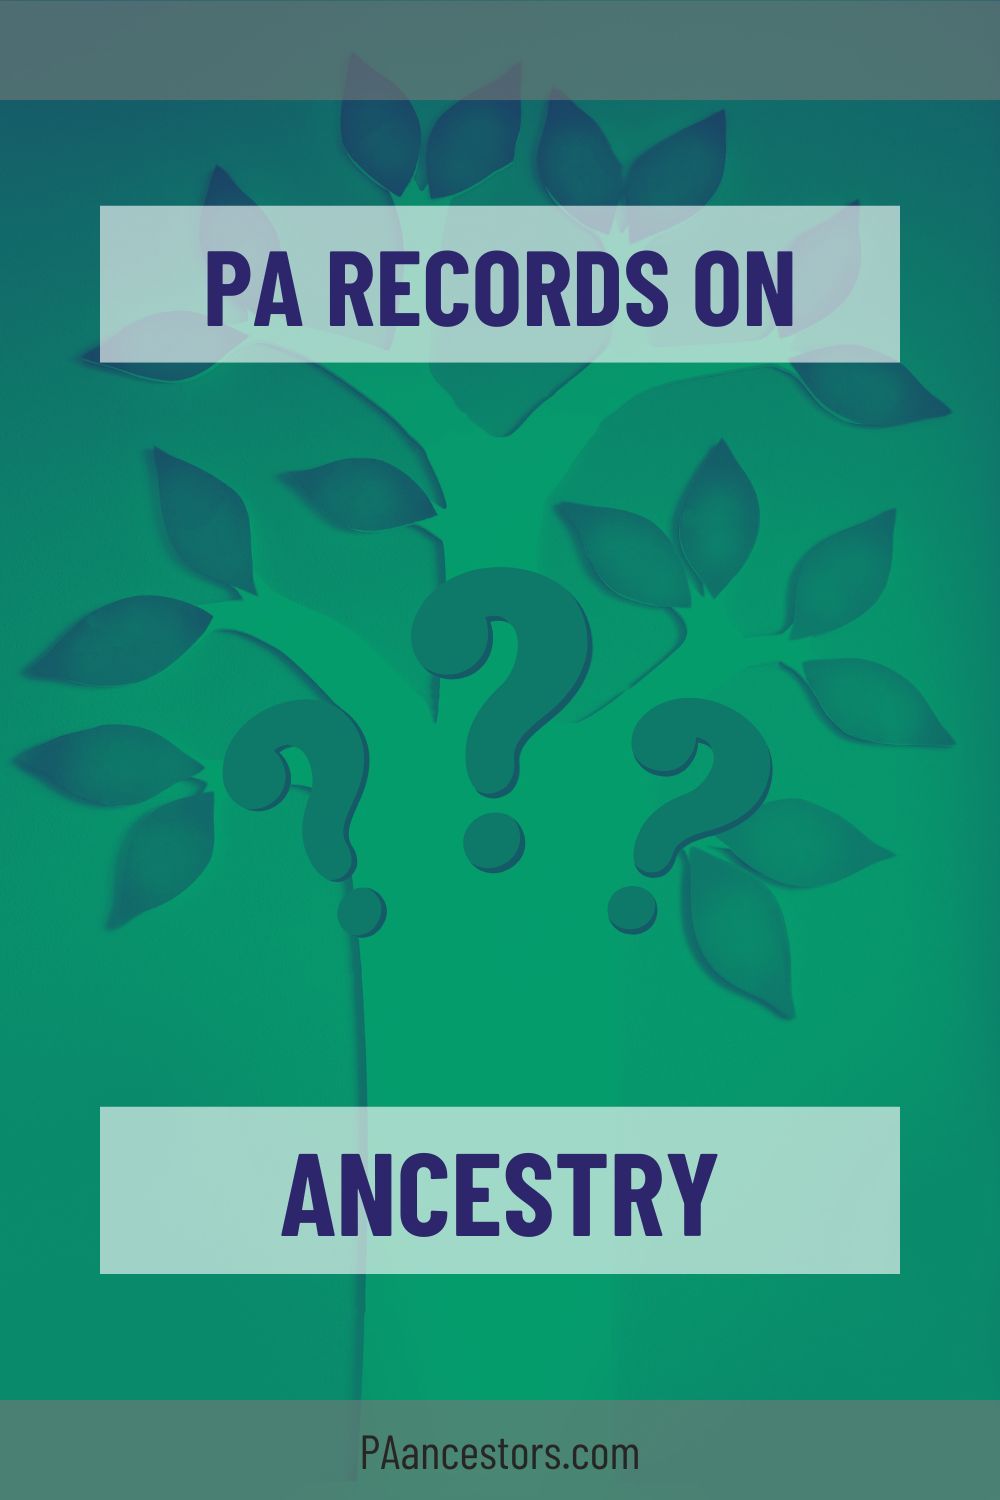 Pennsylvania Genealogy Made Easy: Tips and Tricks for Ancestry.com Research Success